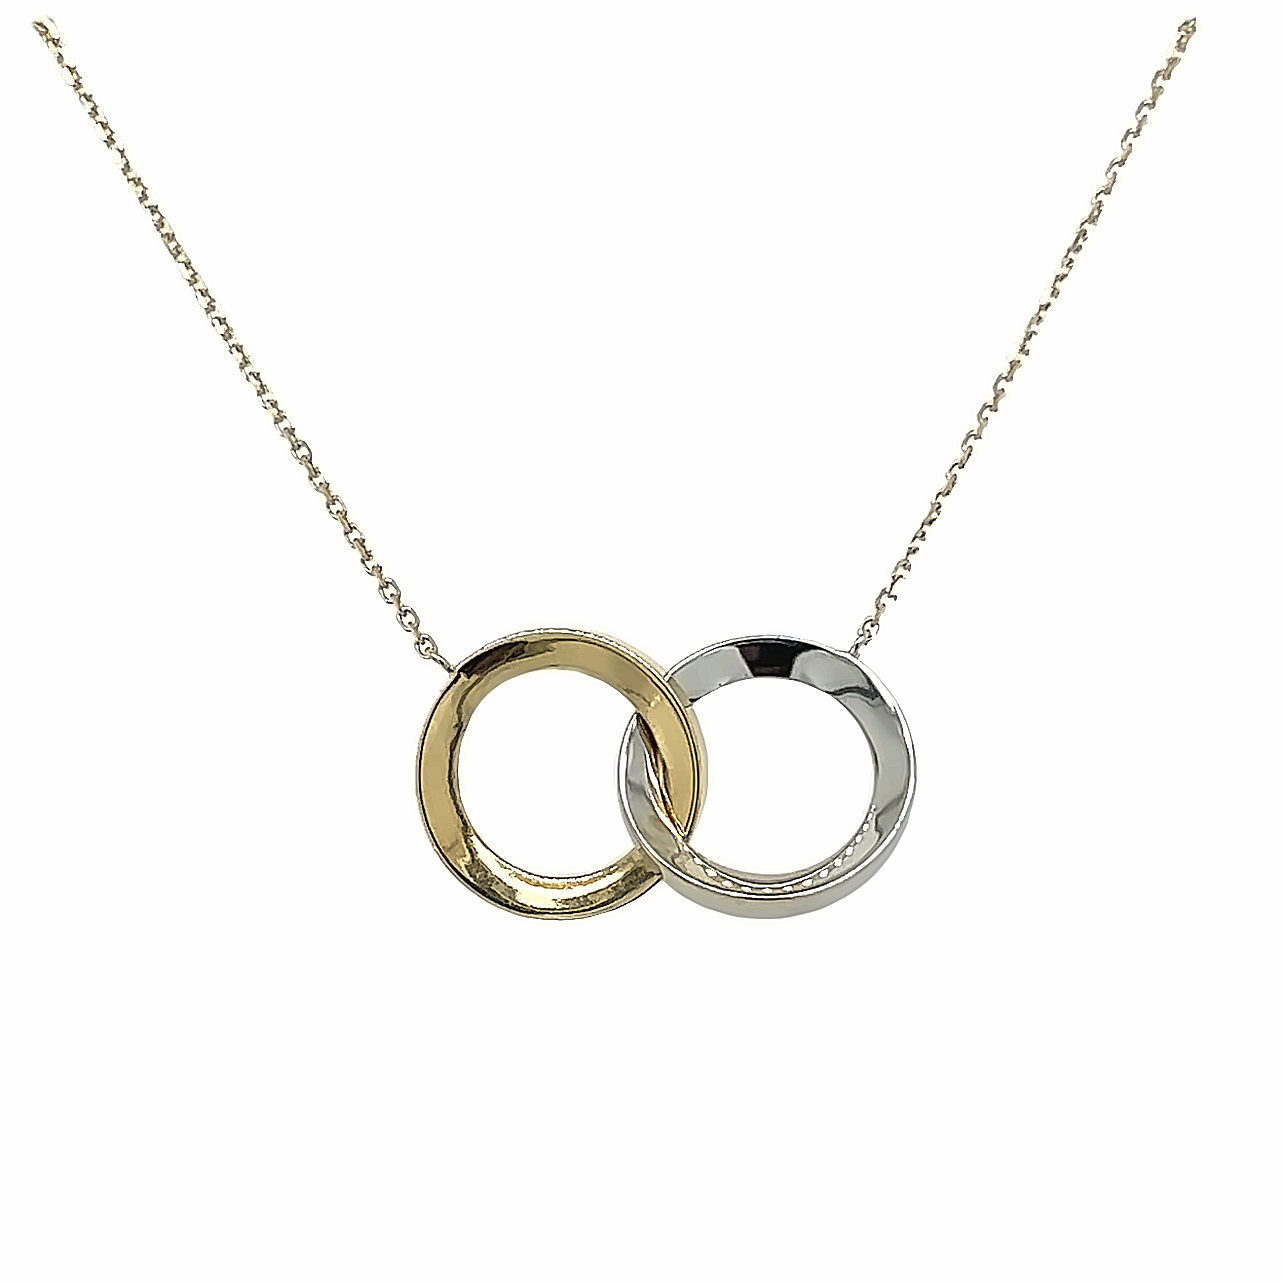 Gold Circles Necklace - 001-432-00333